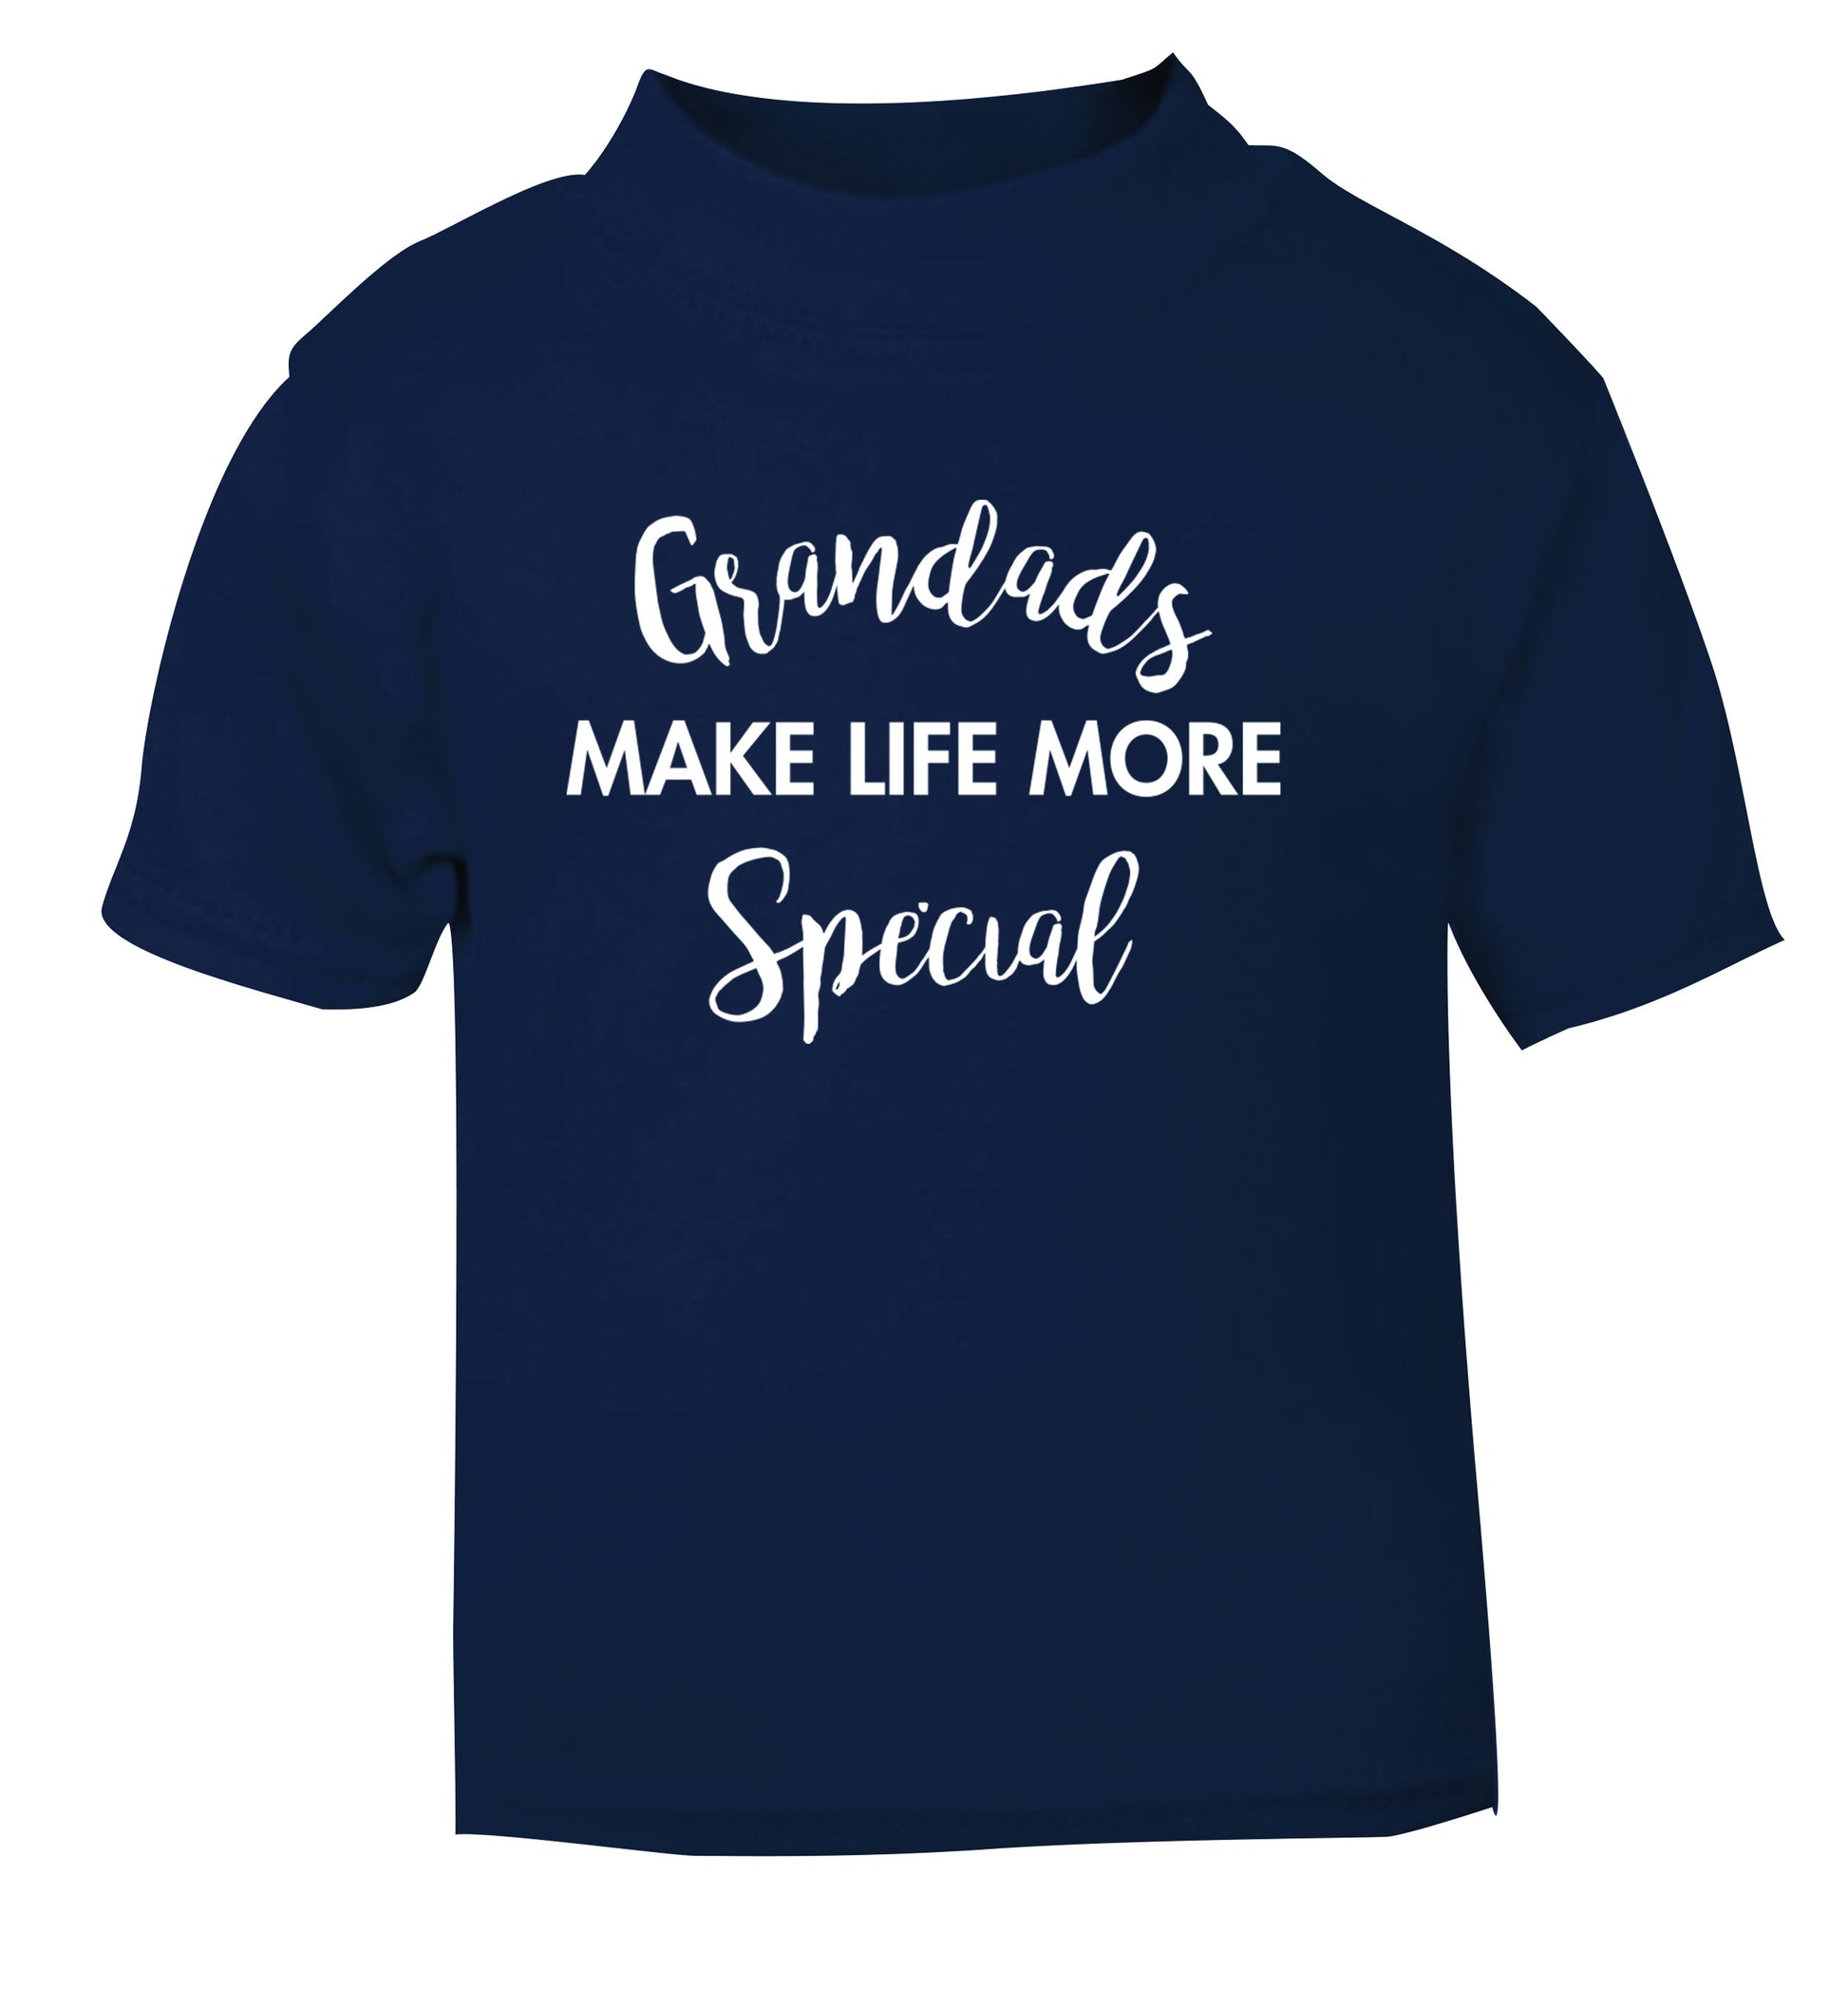 Grandads make life more special navy Baby Toddler Tshirt 2 Years